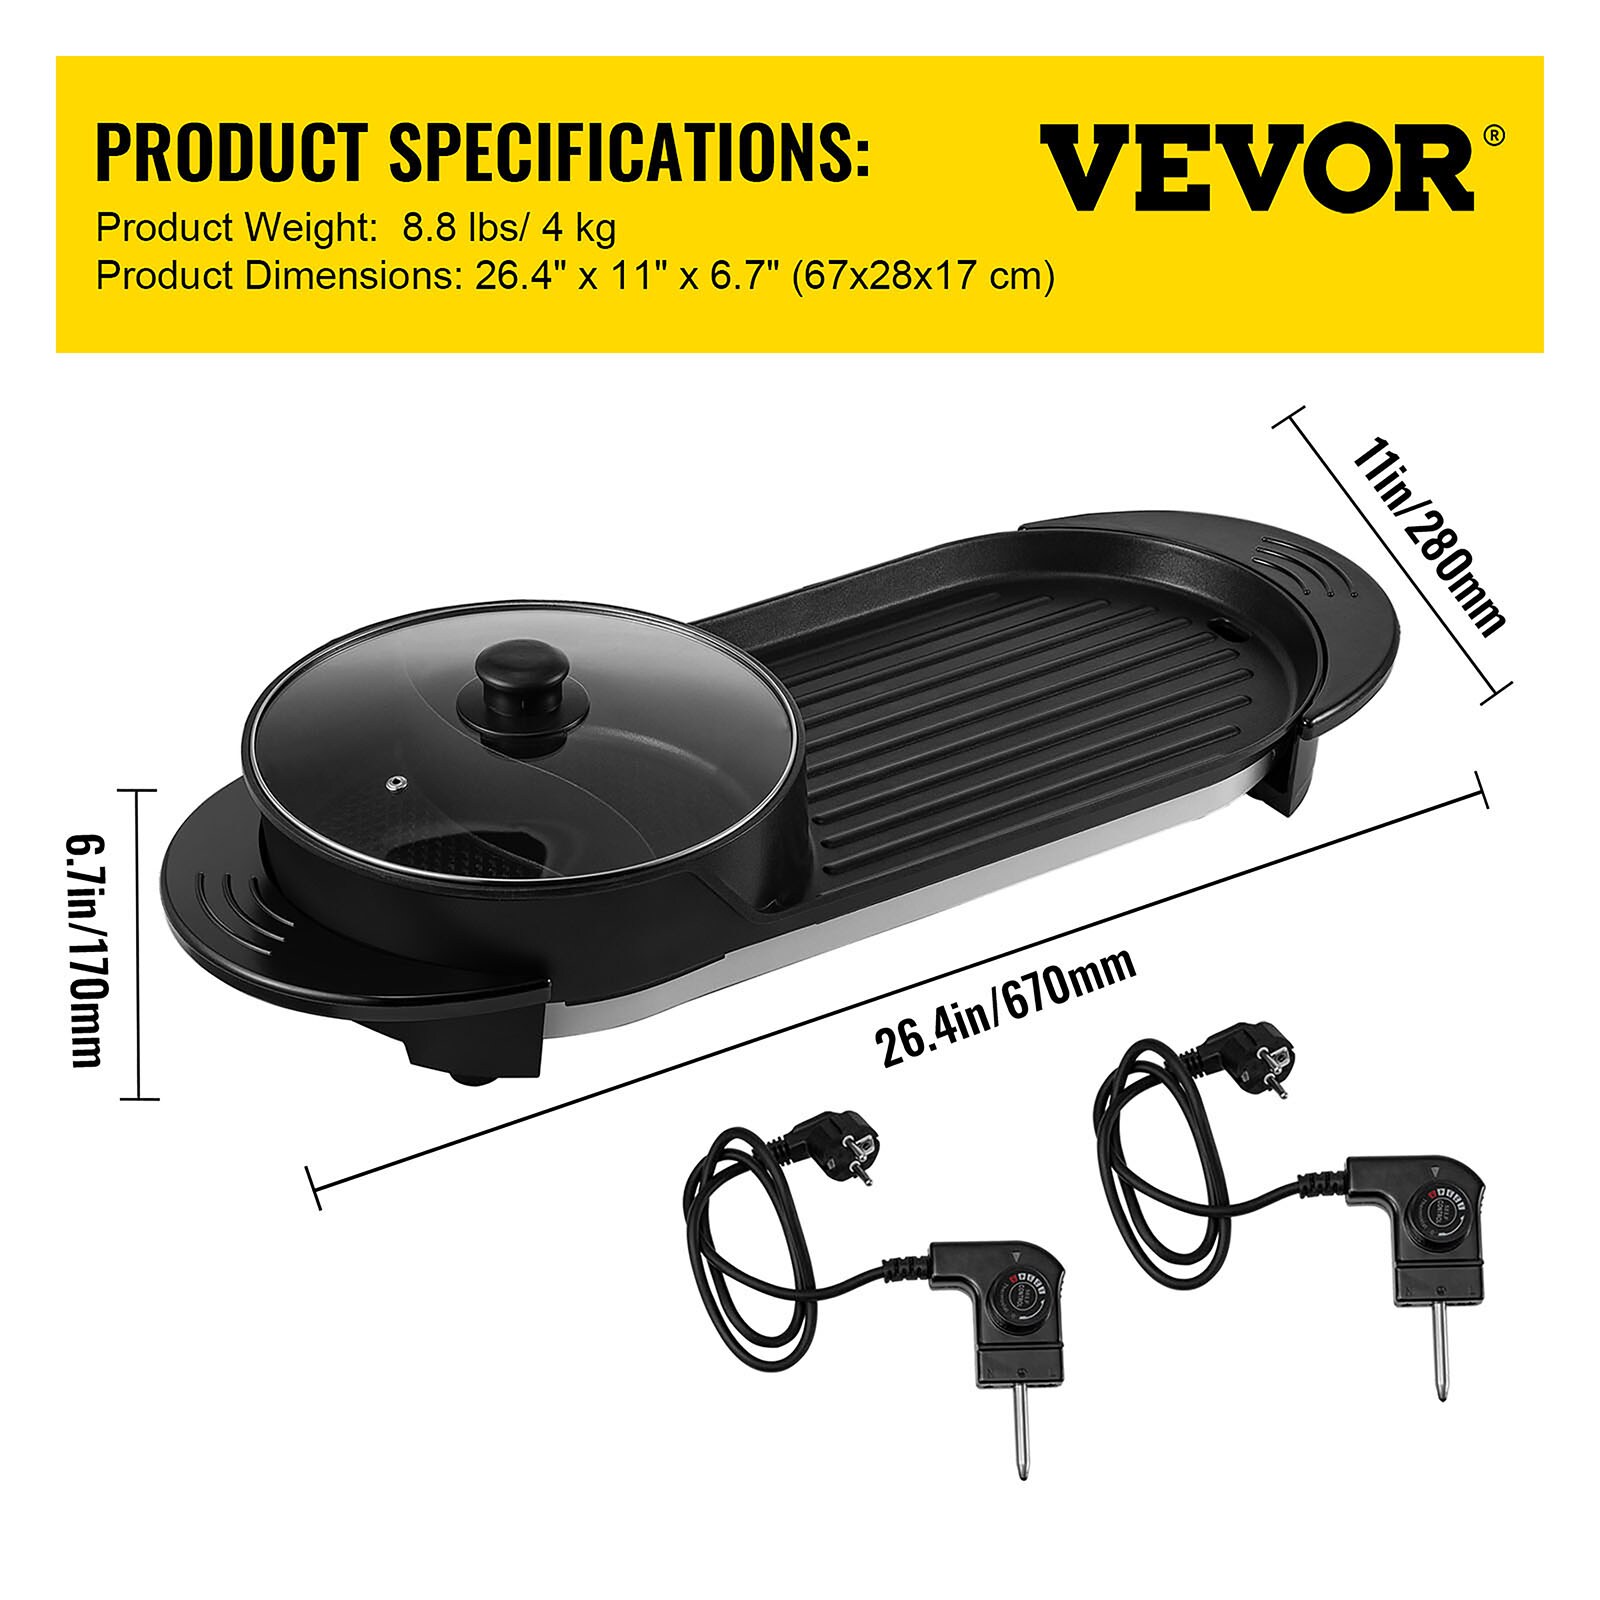 VEVORbrand 2 in 1 Electric Hot Pot and Grill,2400W Smokeless Hot Pot Grill,BBQ  Hot Pot, Black 